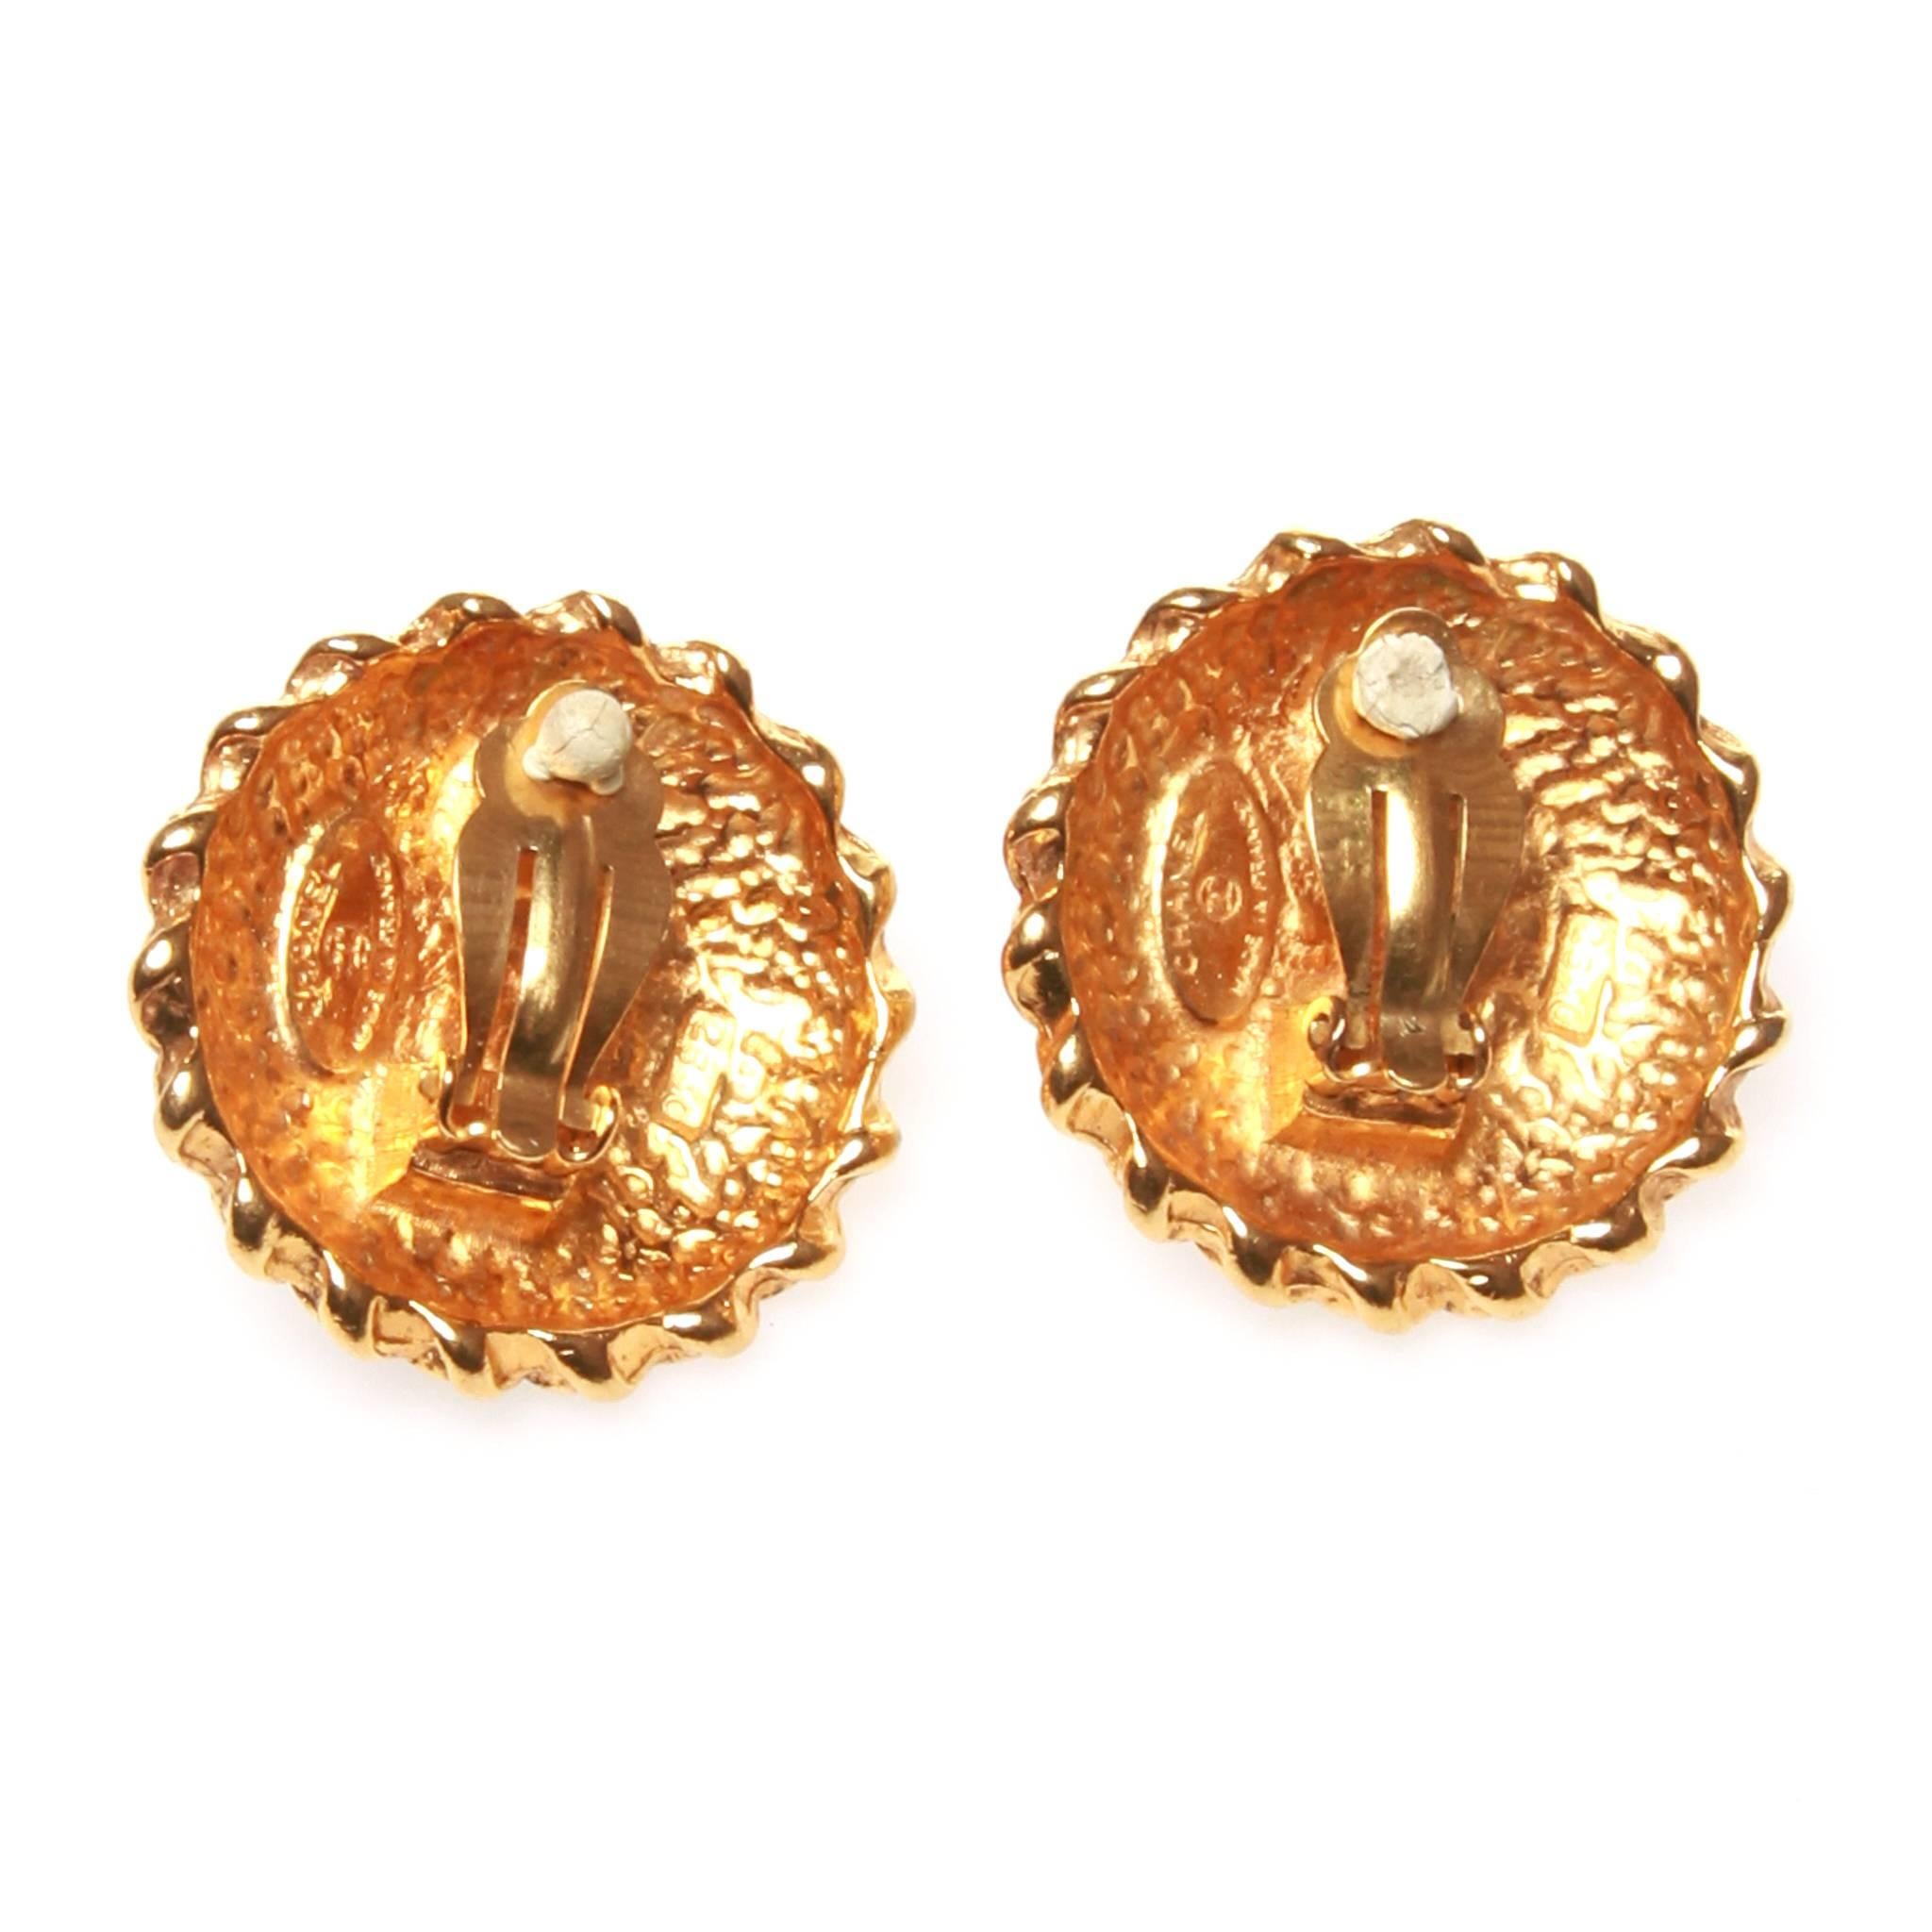 Chanel vintage earrings featuring a faux pearl centre surrounded by knit-look gold-tone metal. 

